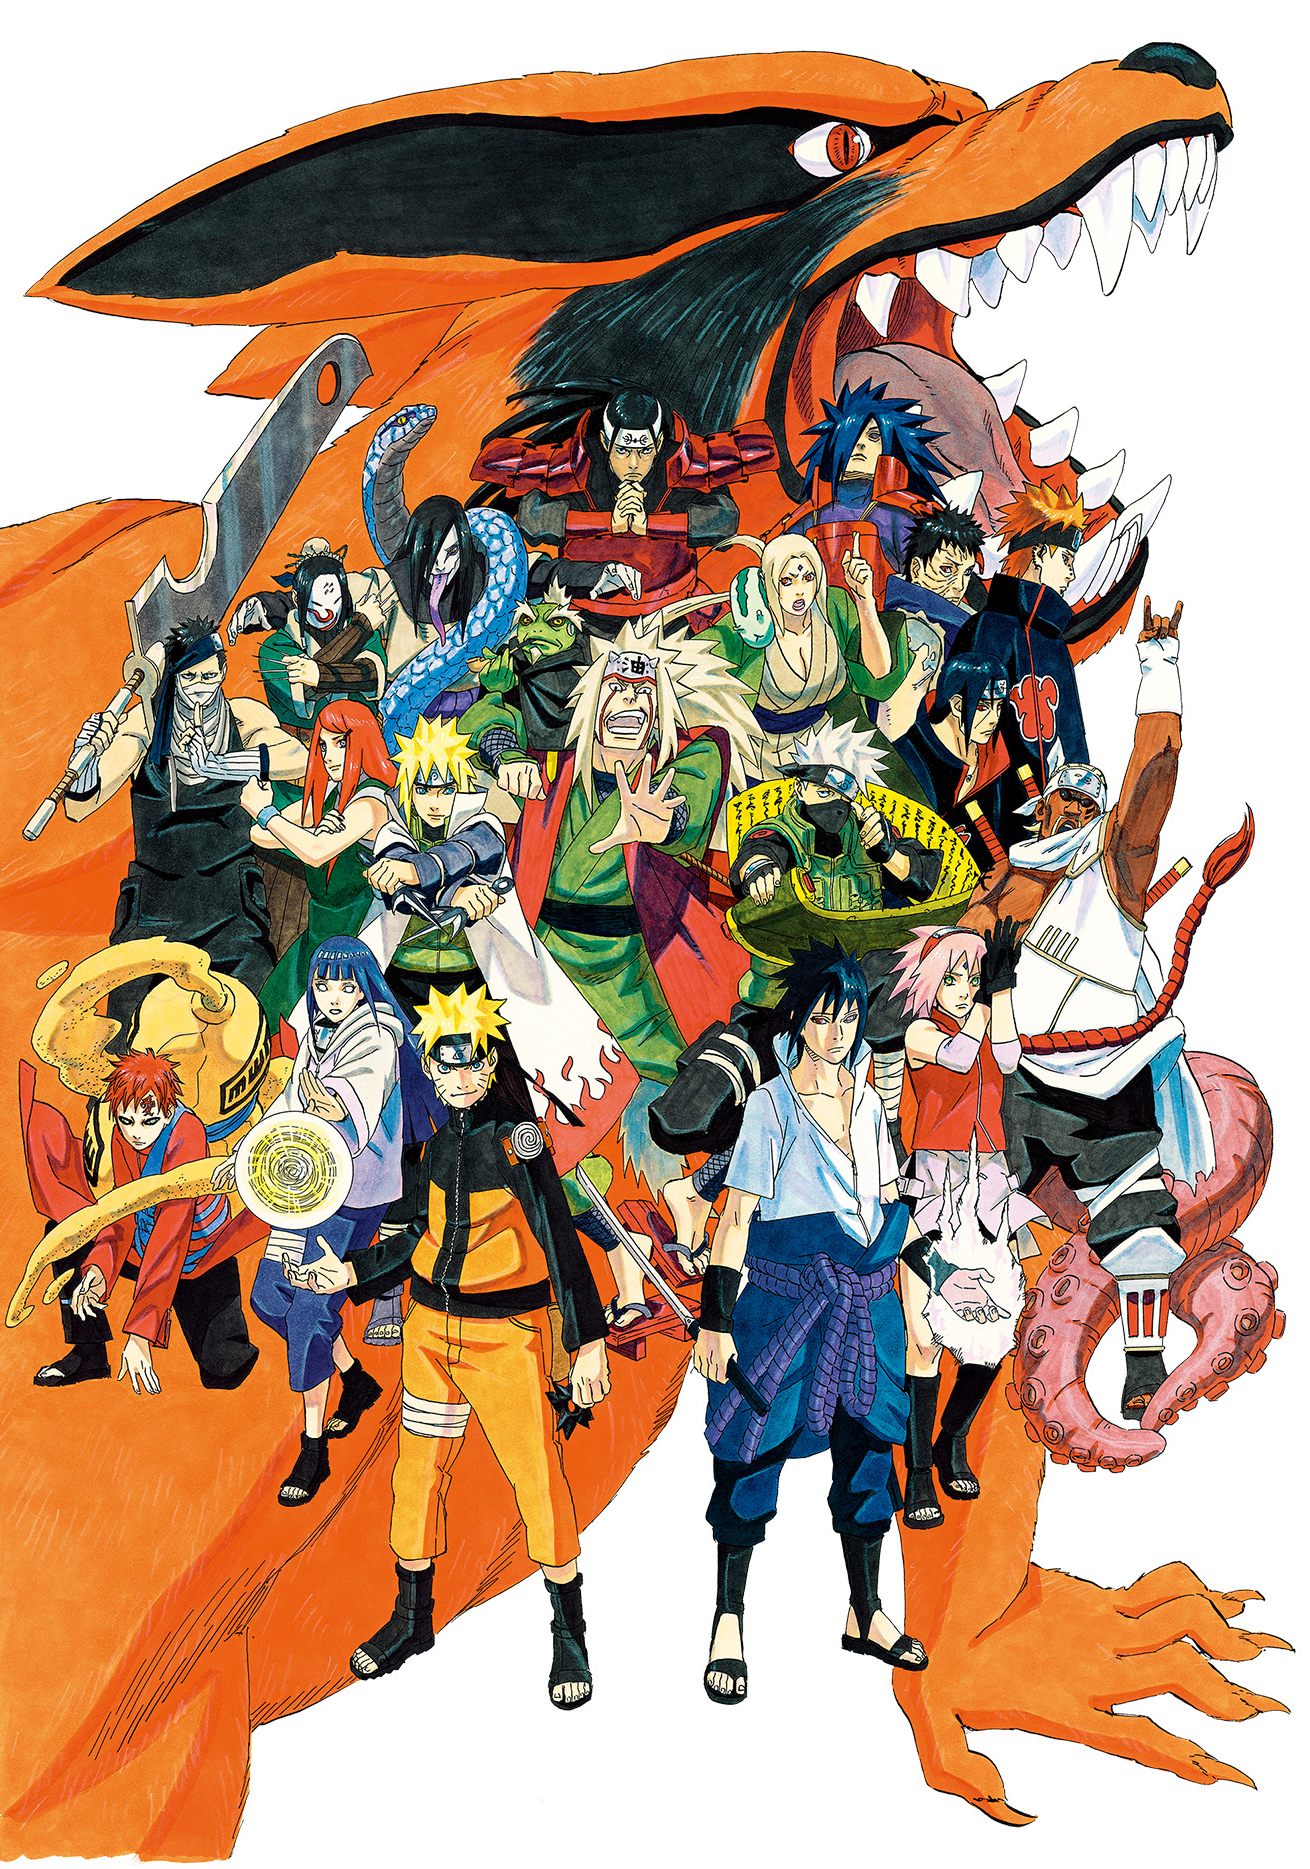 A Complete Timeline Of Every Naruto Episode Arc and Season